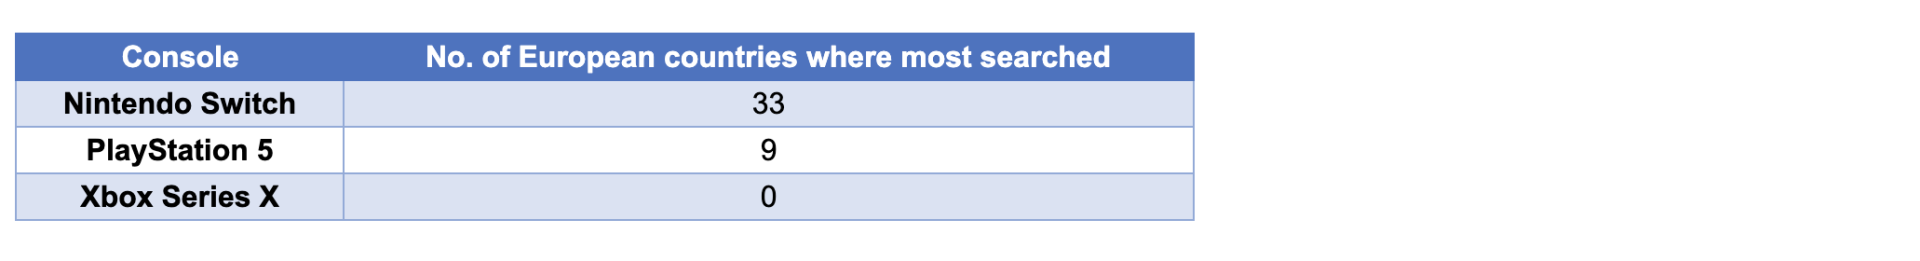 No._of_European_countries_where_most_searched.png